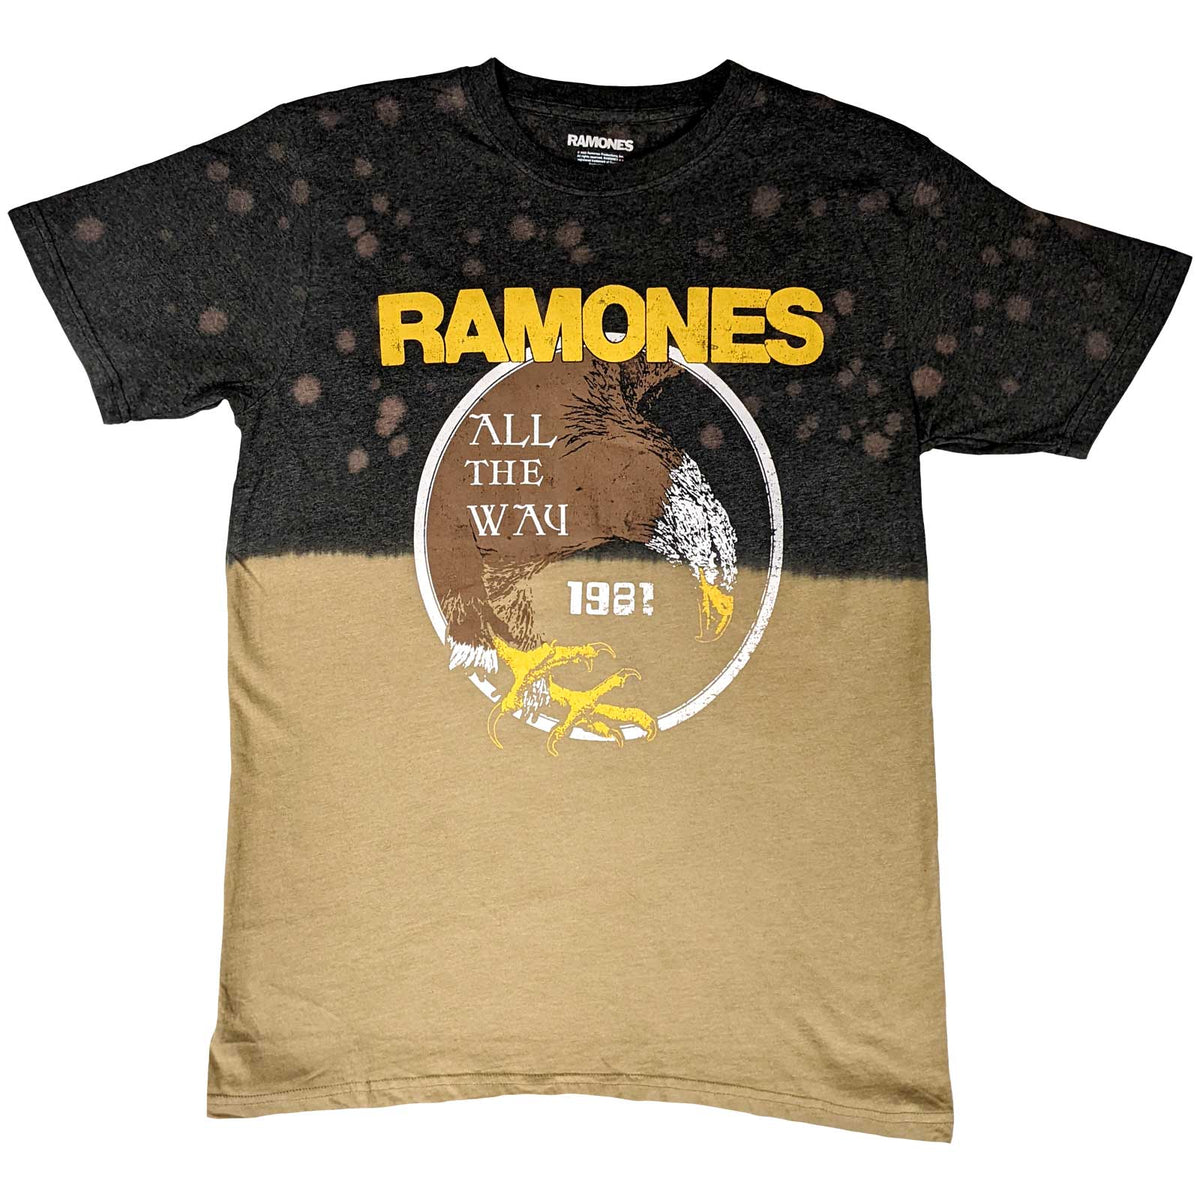 Ramones Adult T-Shirt - All The Way (Wash Collection) - Official Licensed Design